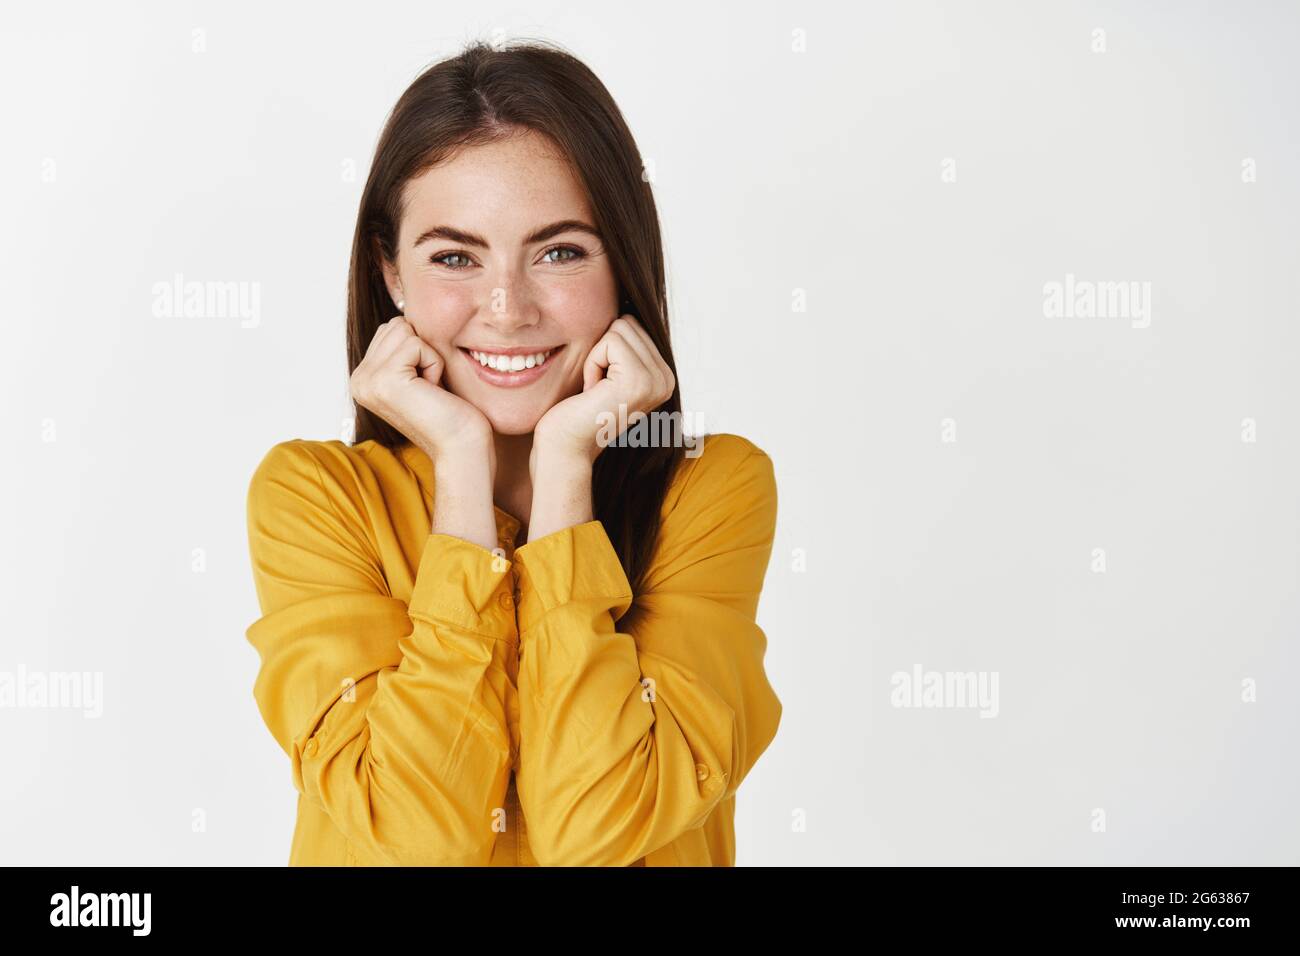 Premium Photo  Image of cute girlfriend smiling and leaning face on